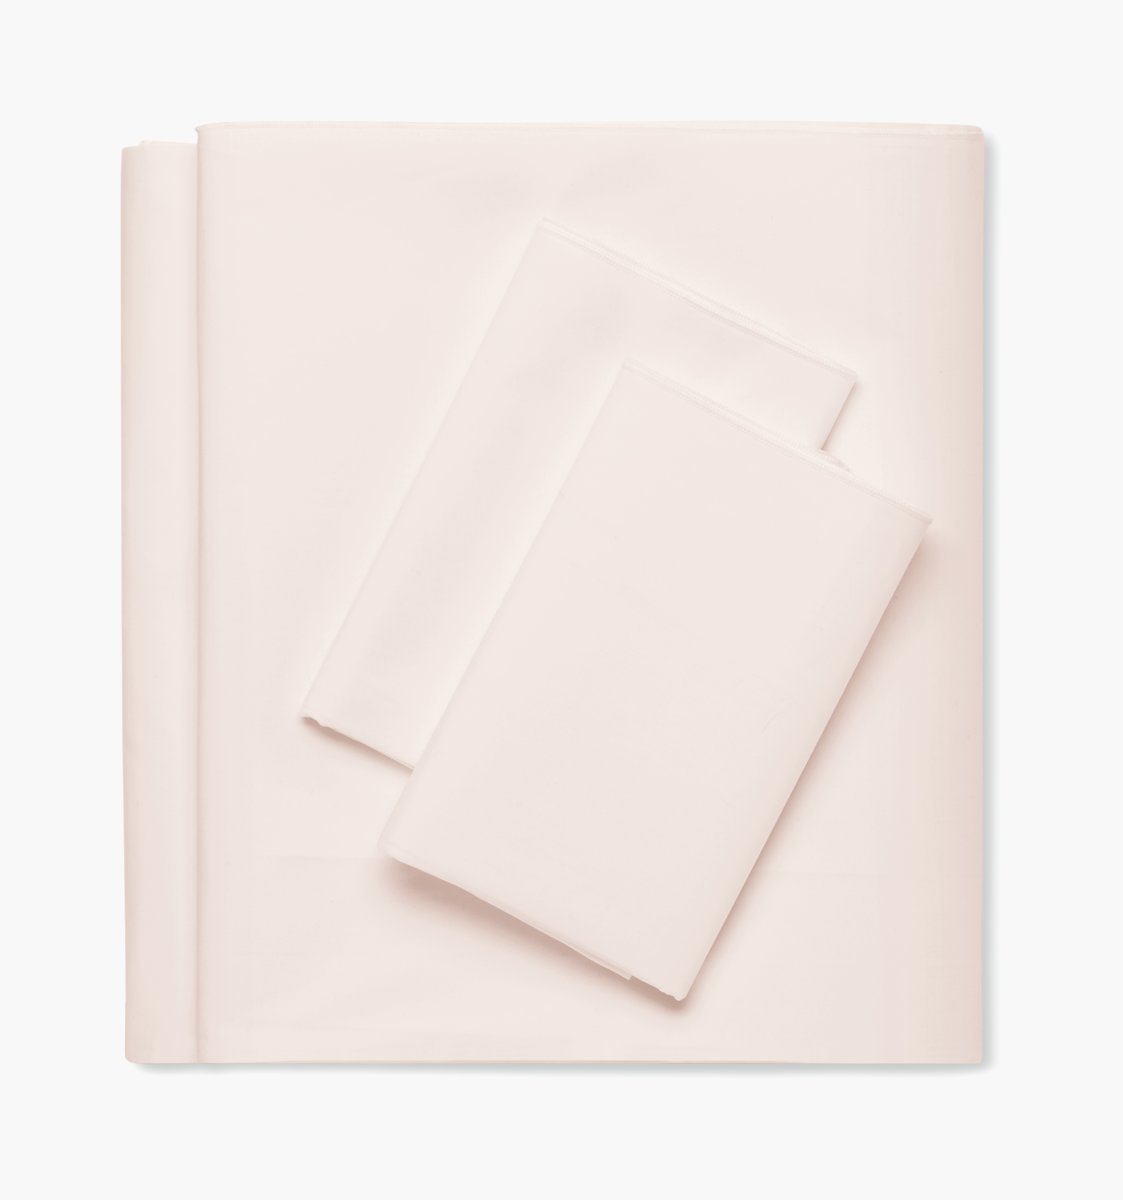 DWR Sheet Set - Percale Outlet